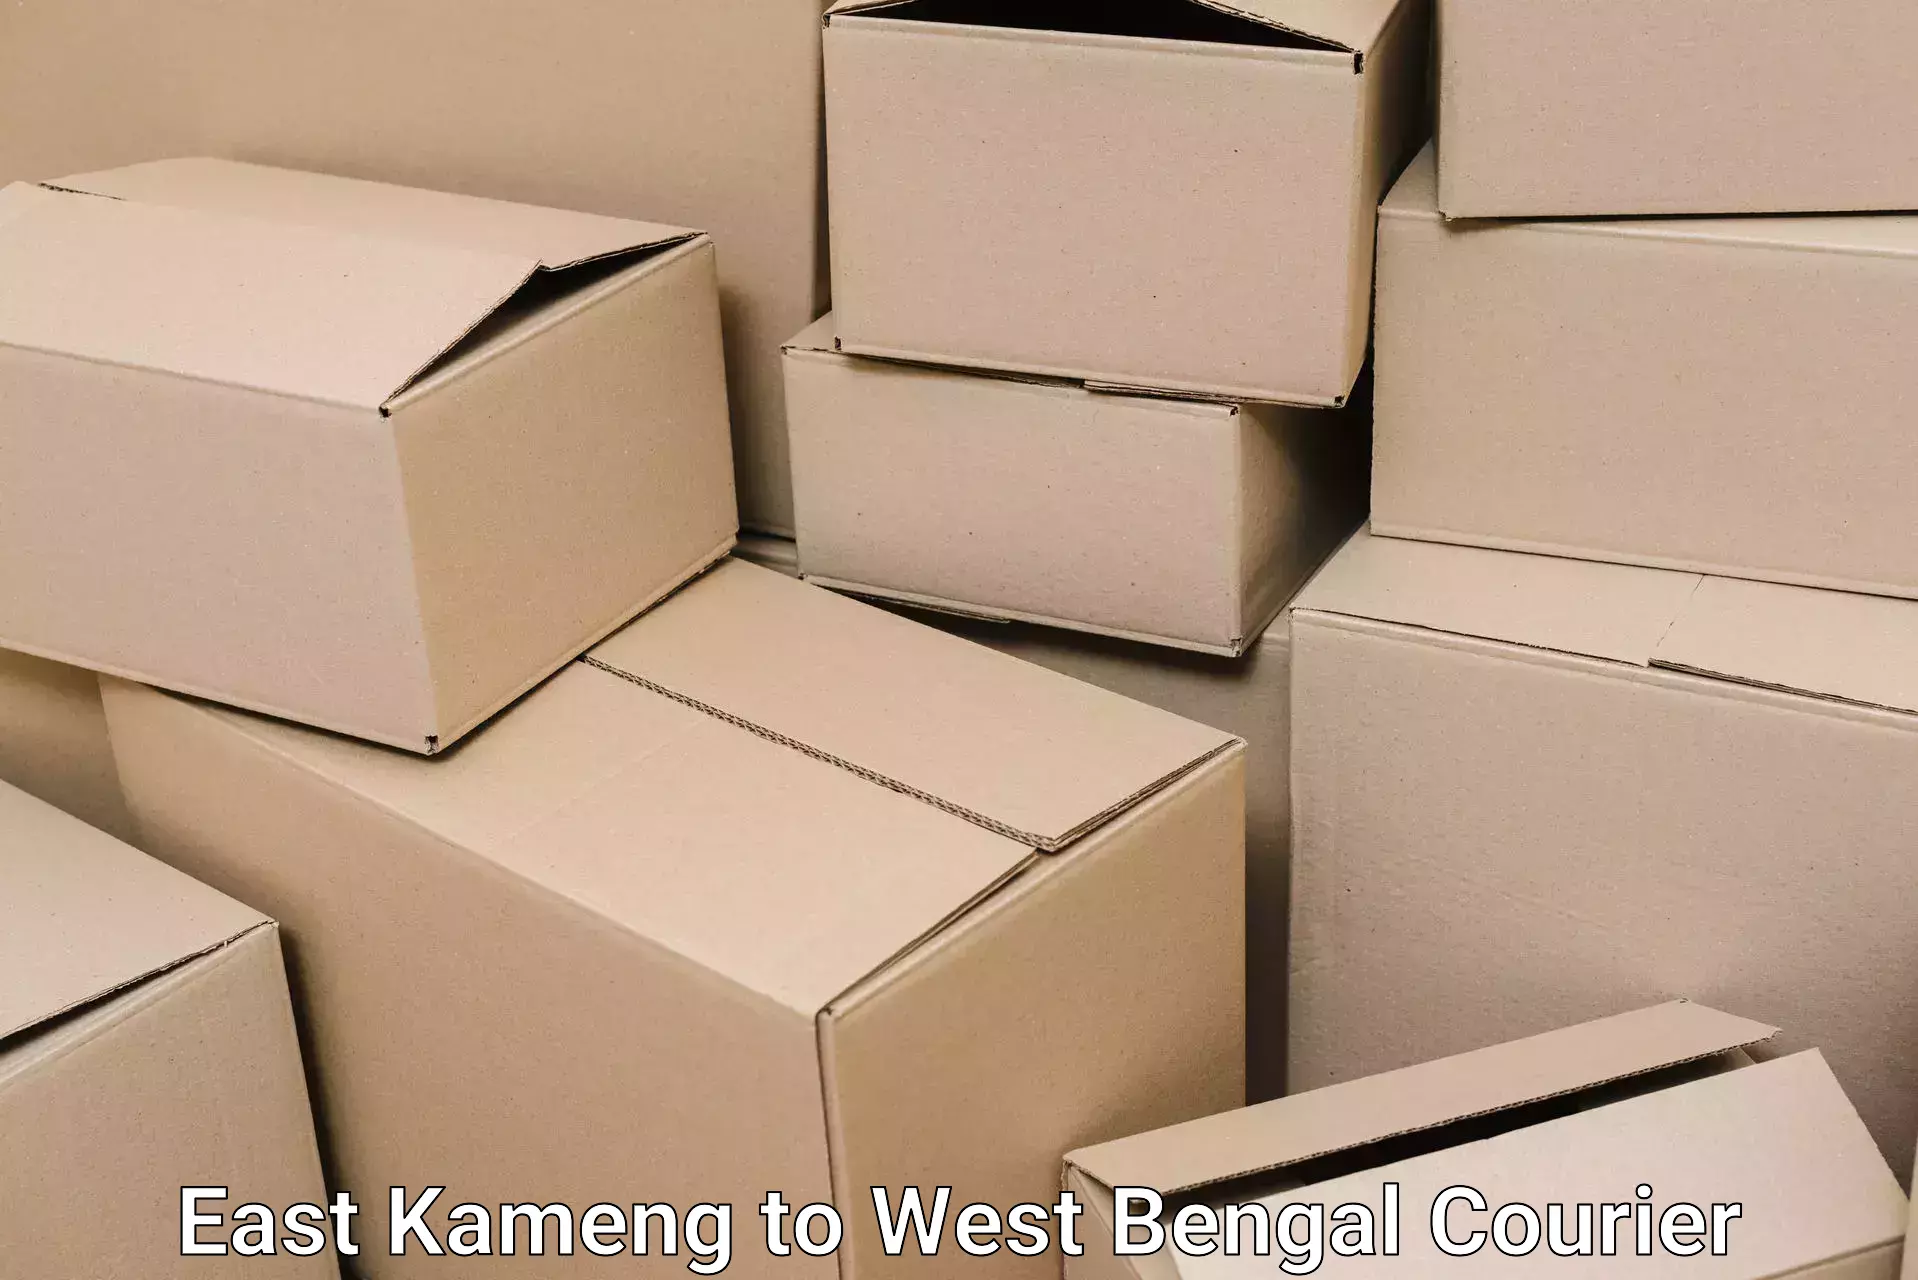 Professional packing services East Kameng to West Bengal